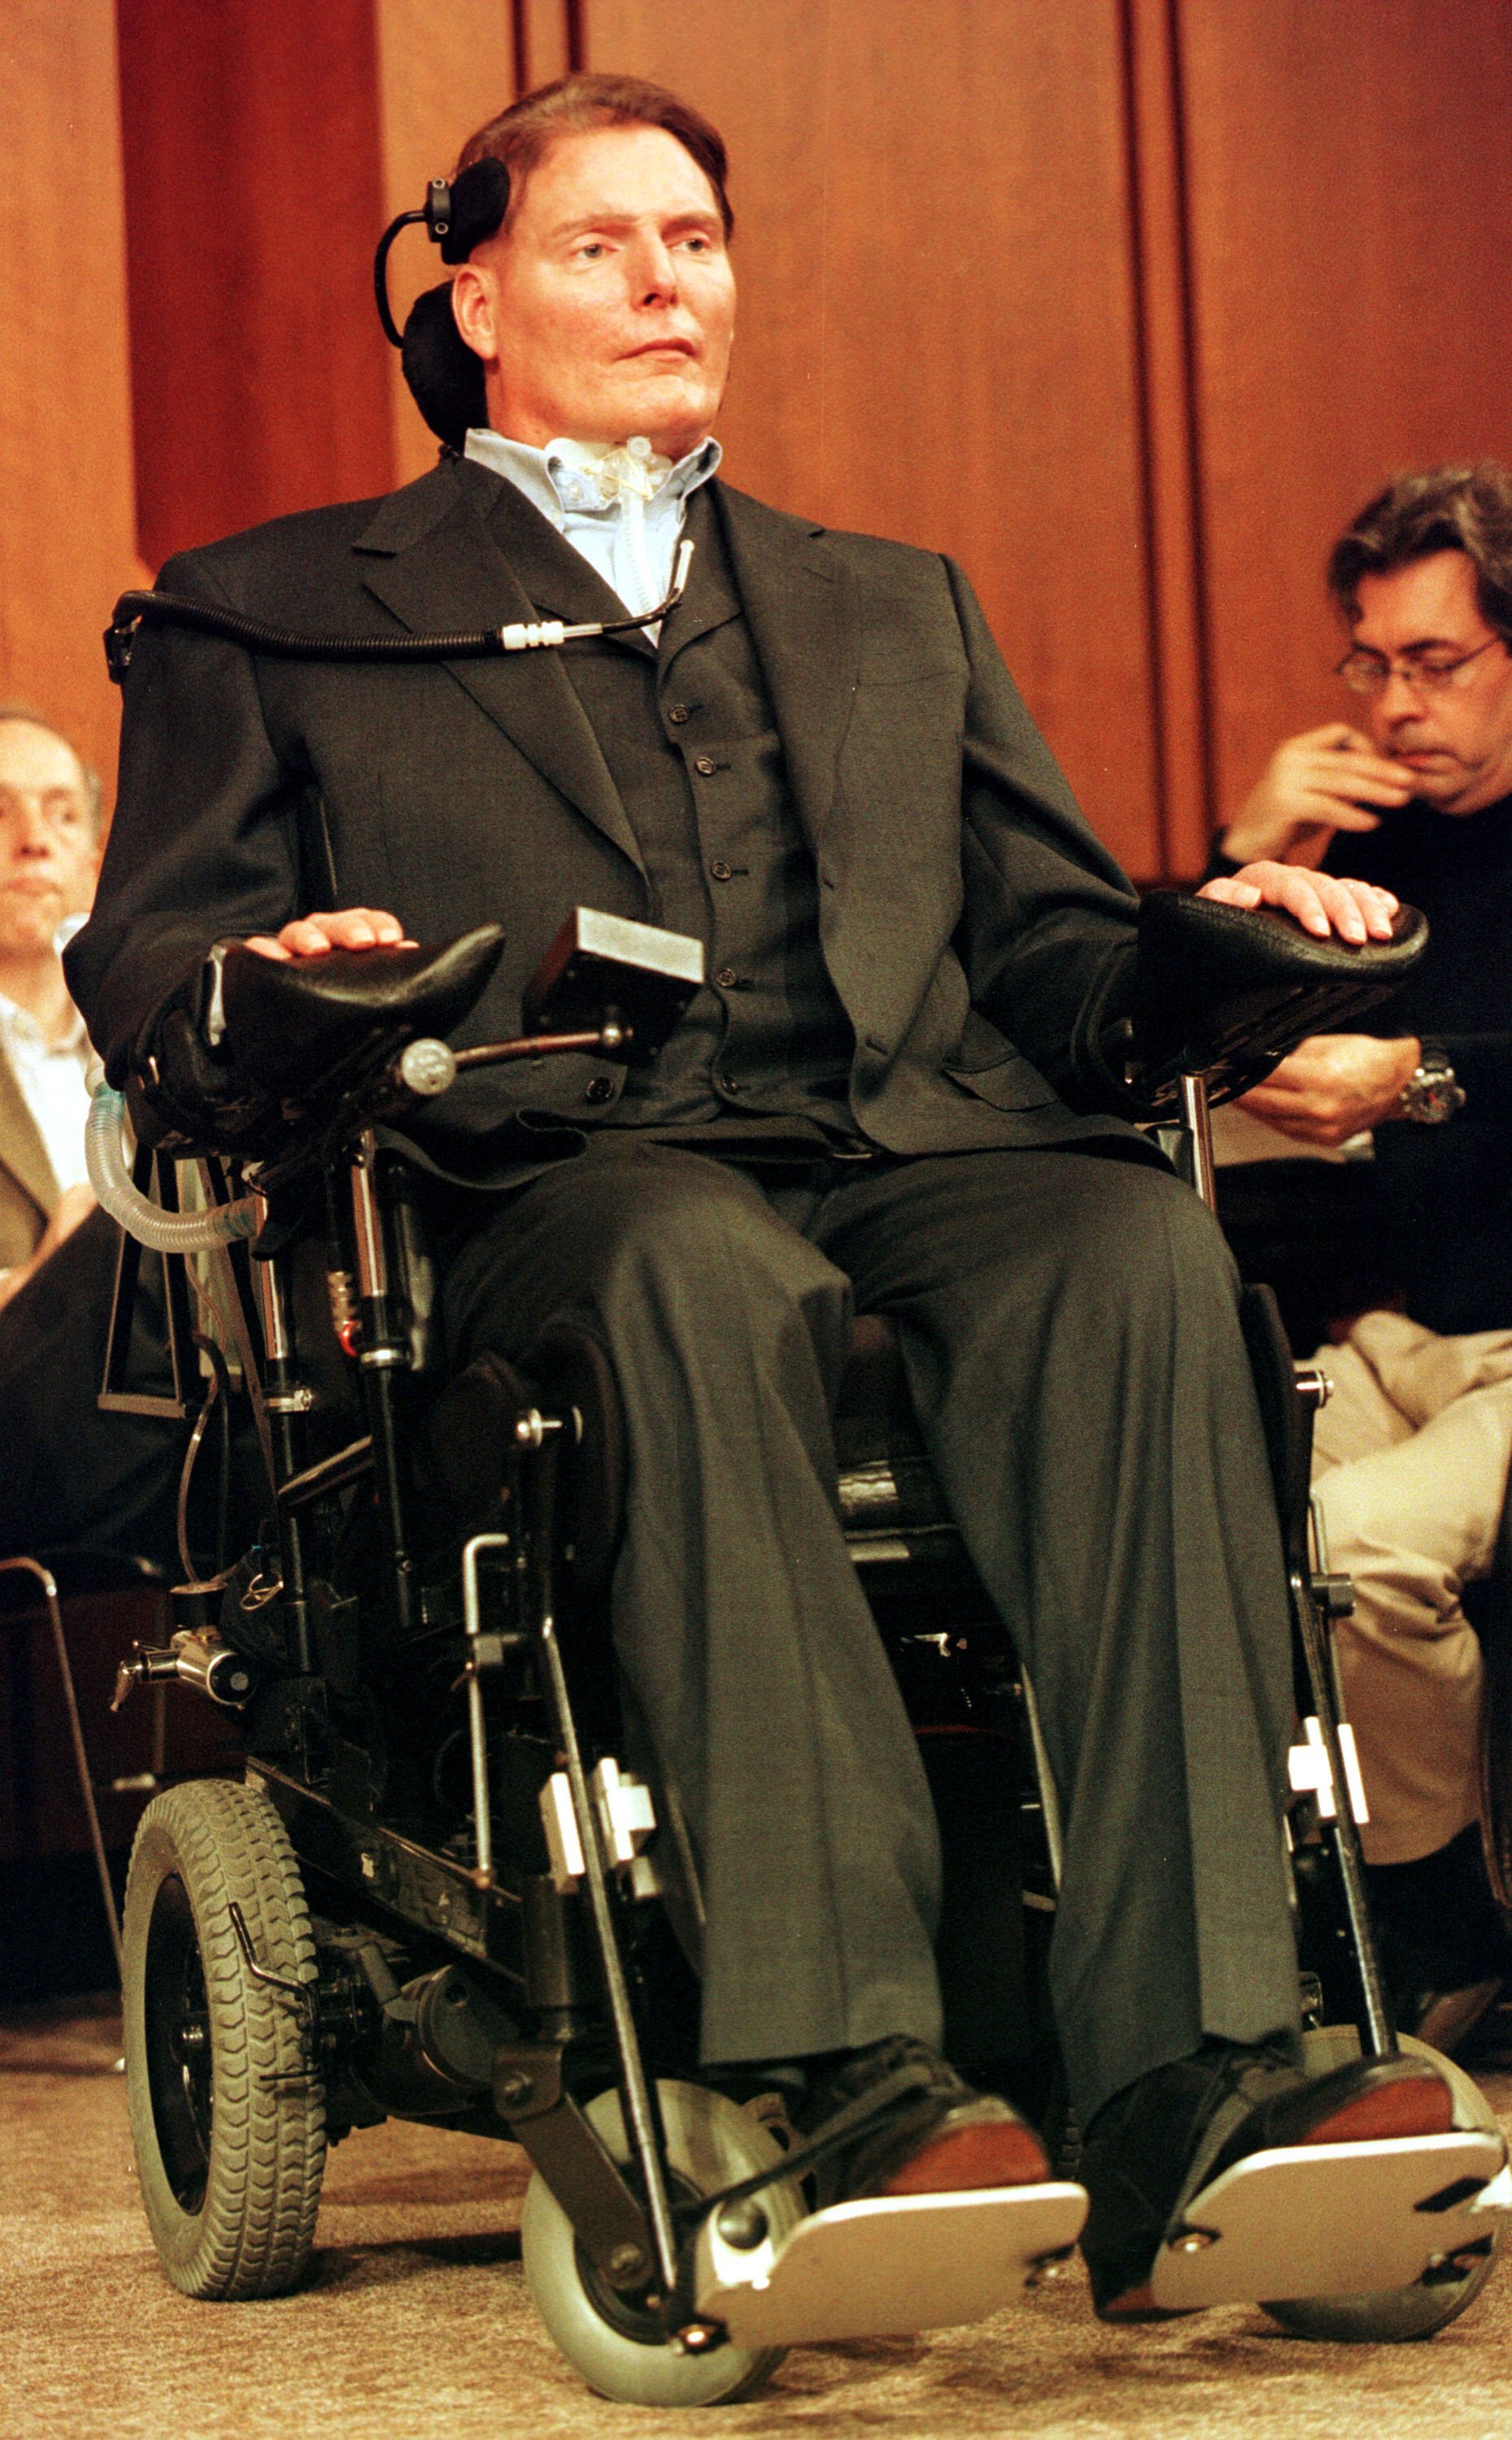 Christopher Reeve attends a hearing on stem cell research Washington, D.C. | Photo: Getty Images